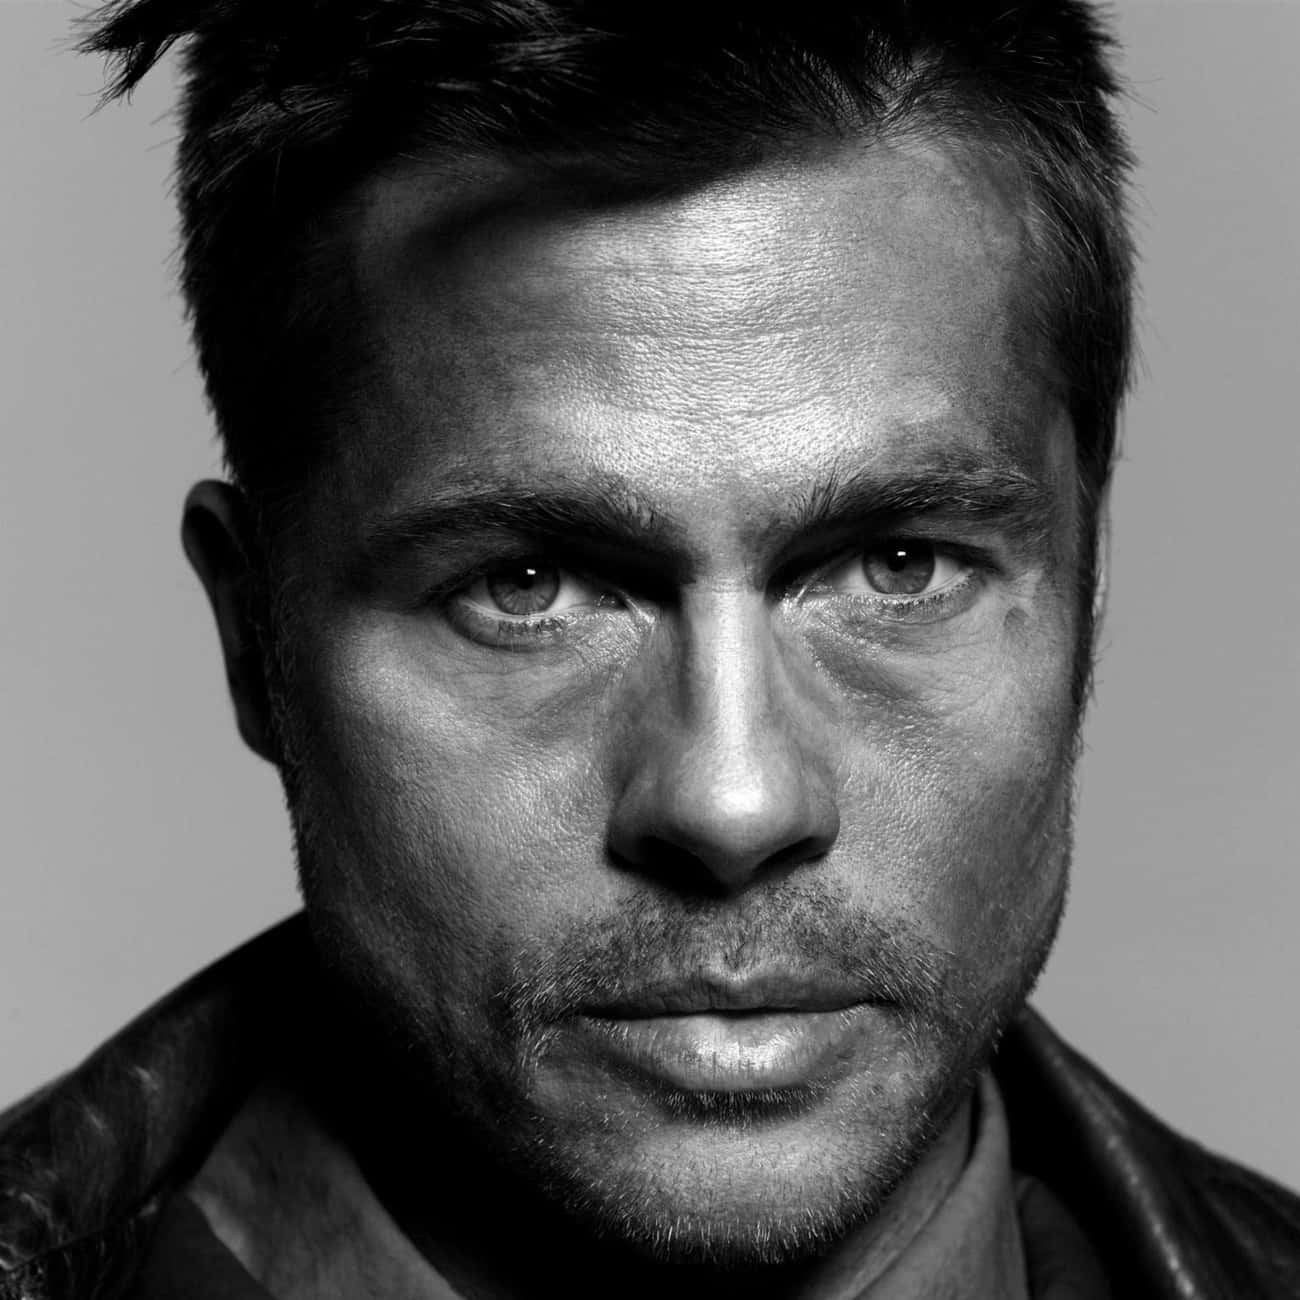 Brad Pitt Being Really, Really, Really Ridiculously Good Looking